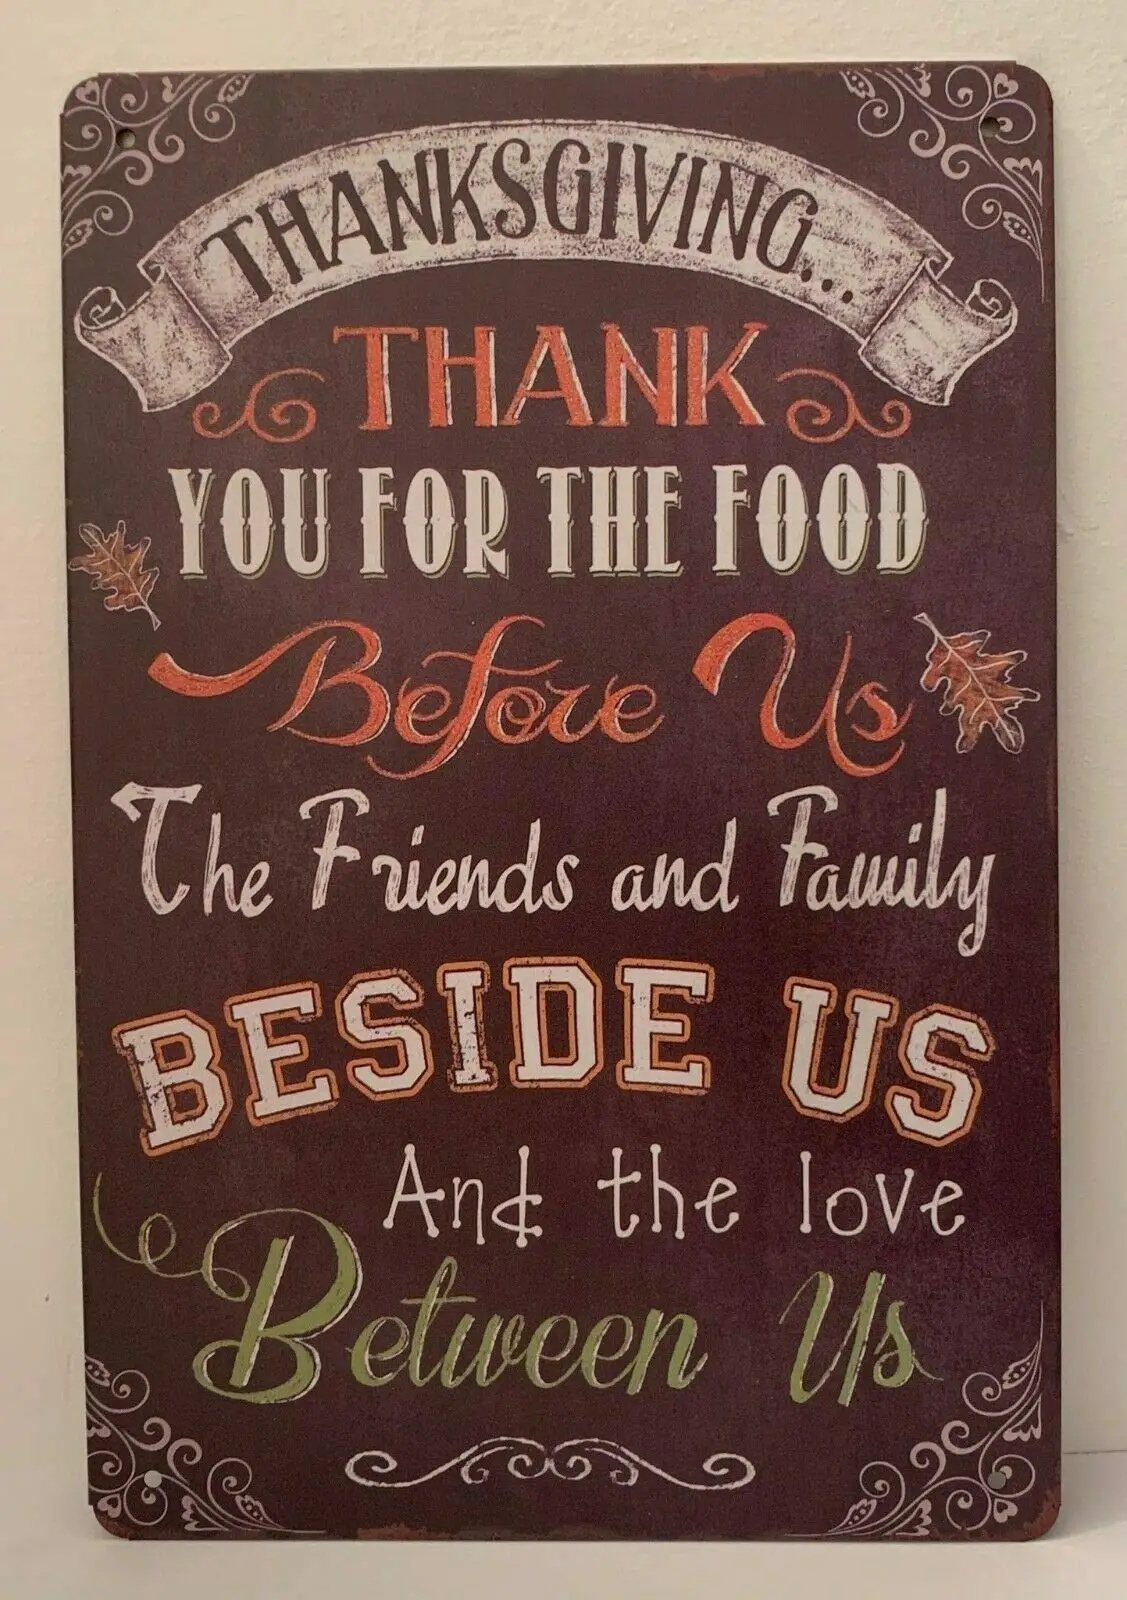 

Tin Sign Thanksgiving Friends Family Food Love Sayings Retro Metal Signs Plaques Retro Wall Home Bar Pub Vintage Cafe Decor, 8x1